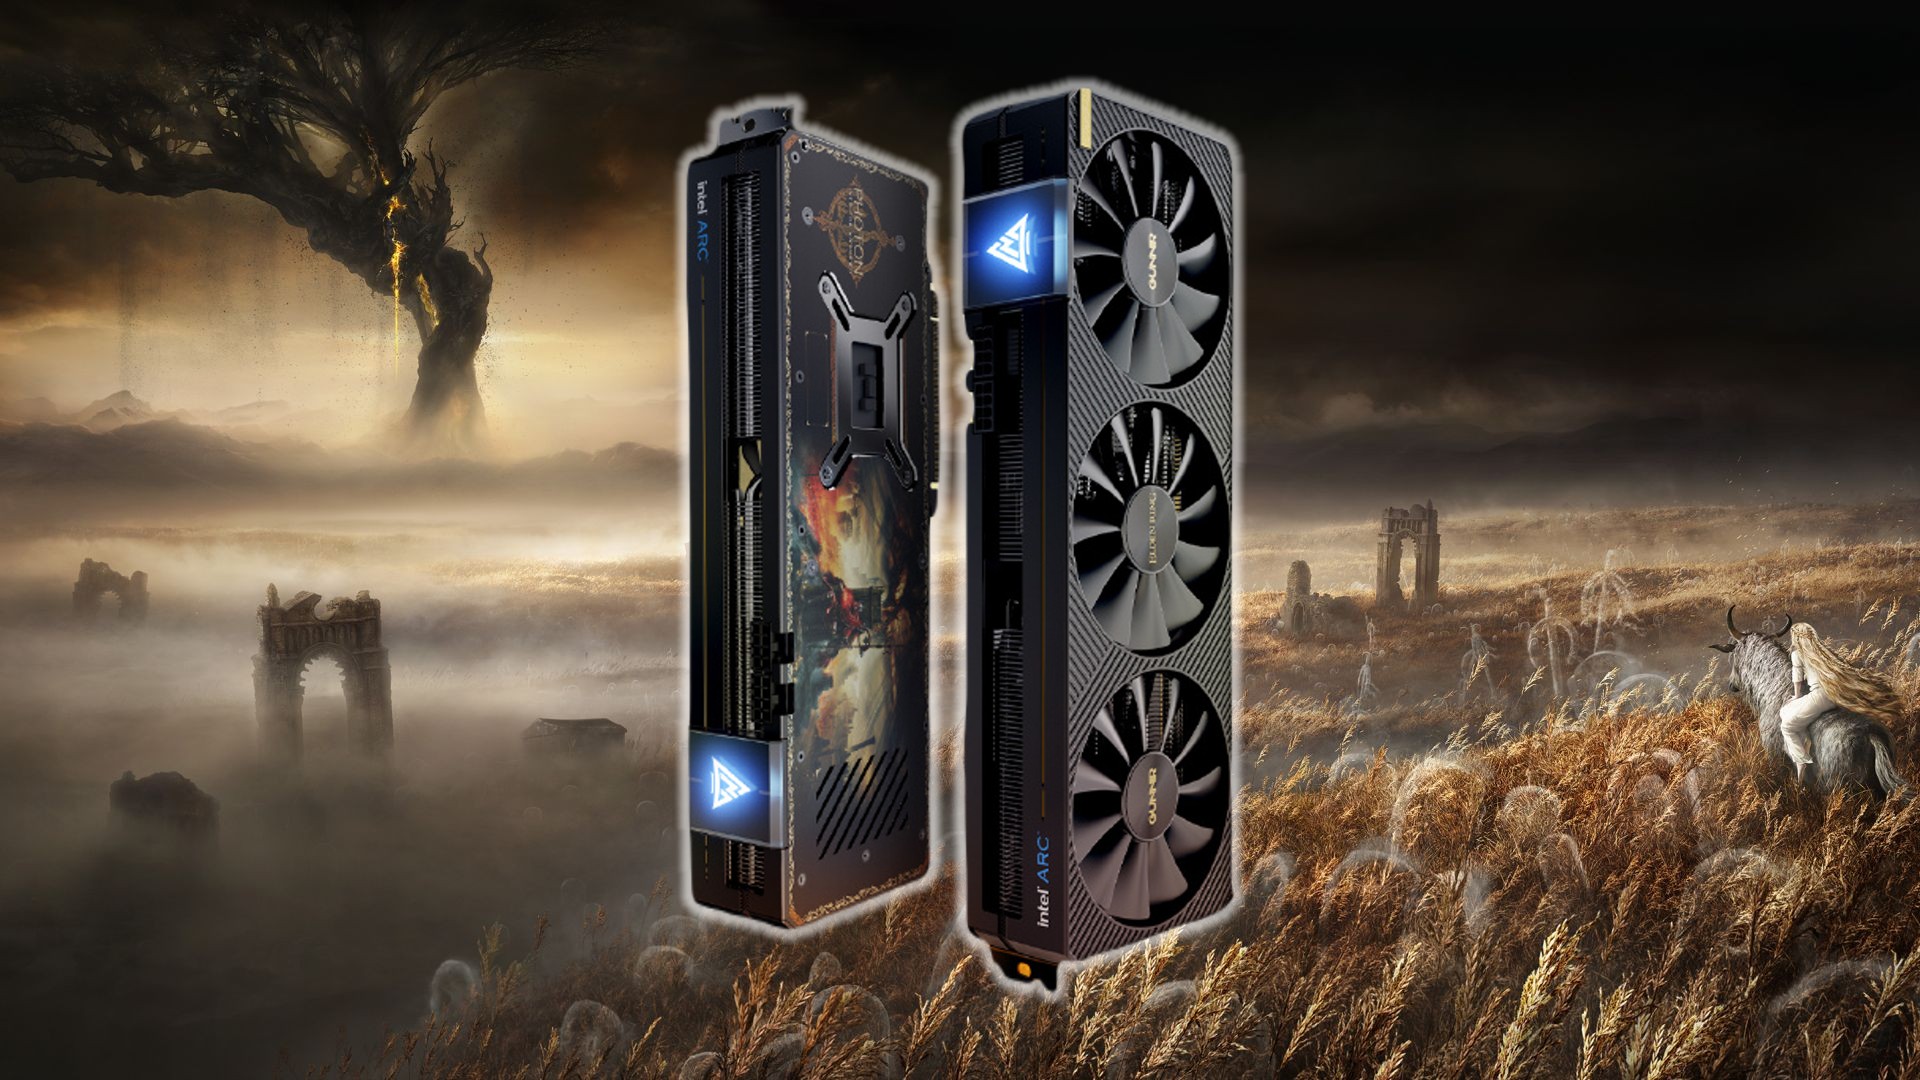 This Elden Ring graphics card is beautiful, but there's a catch